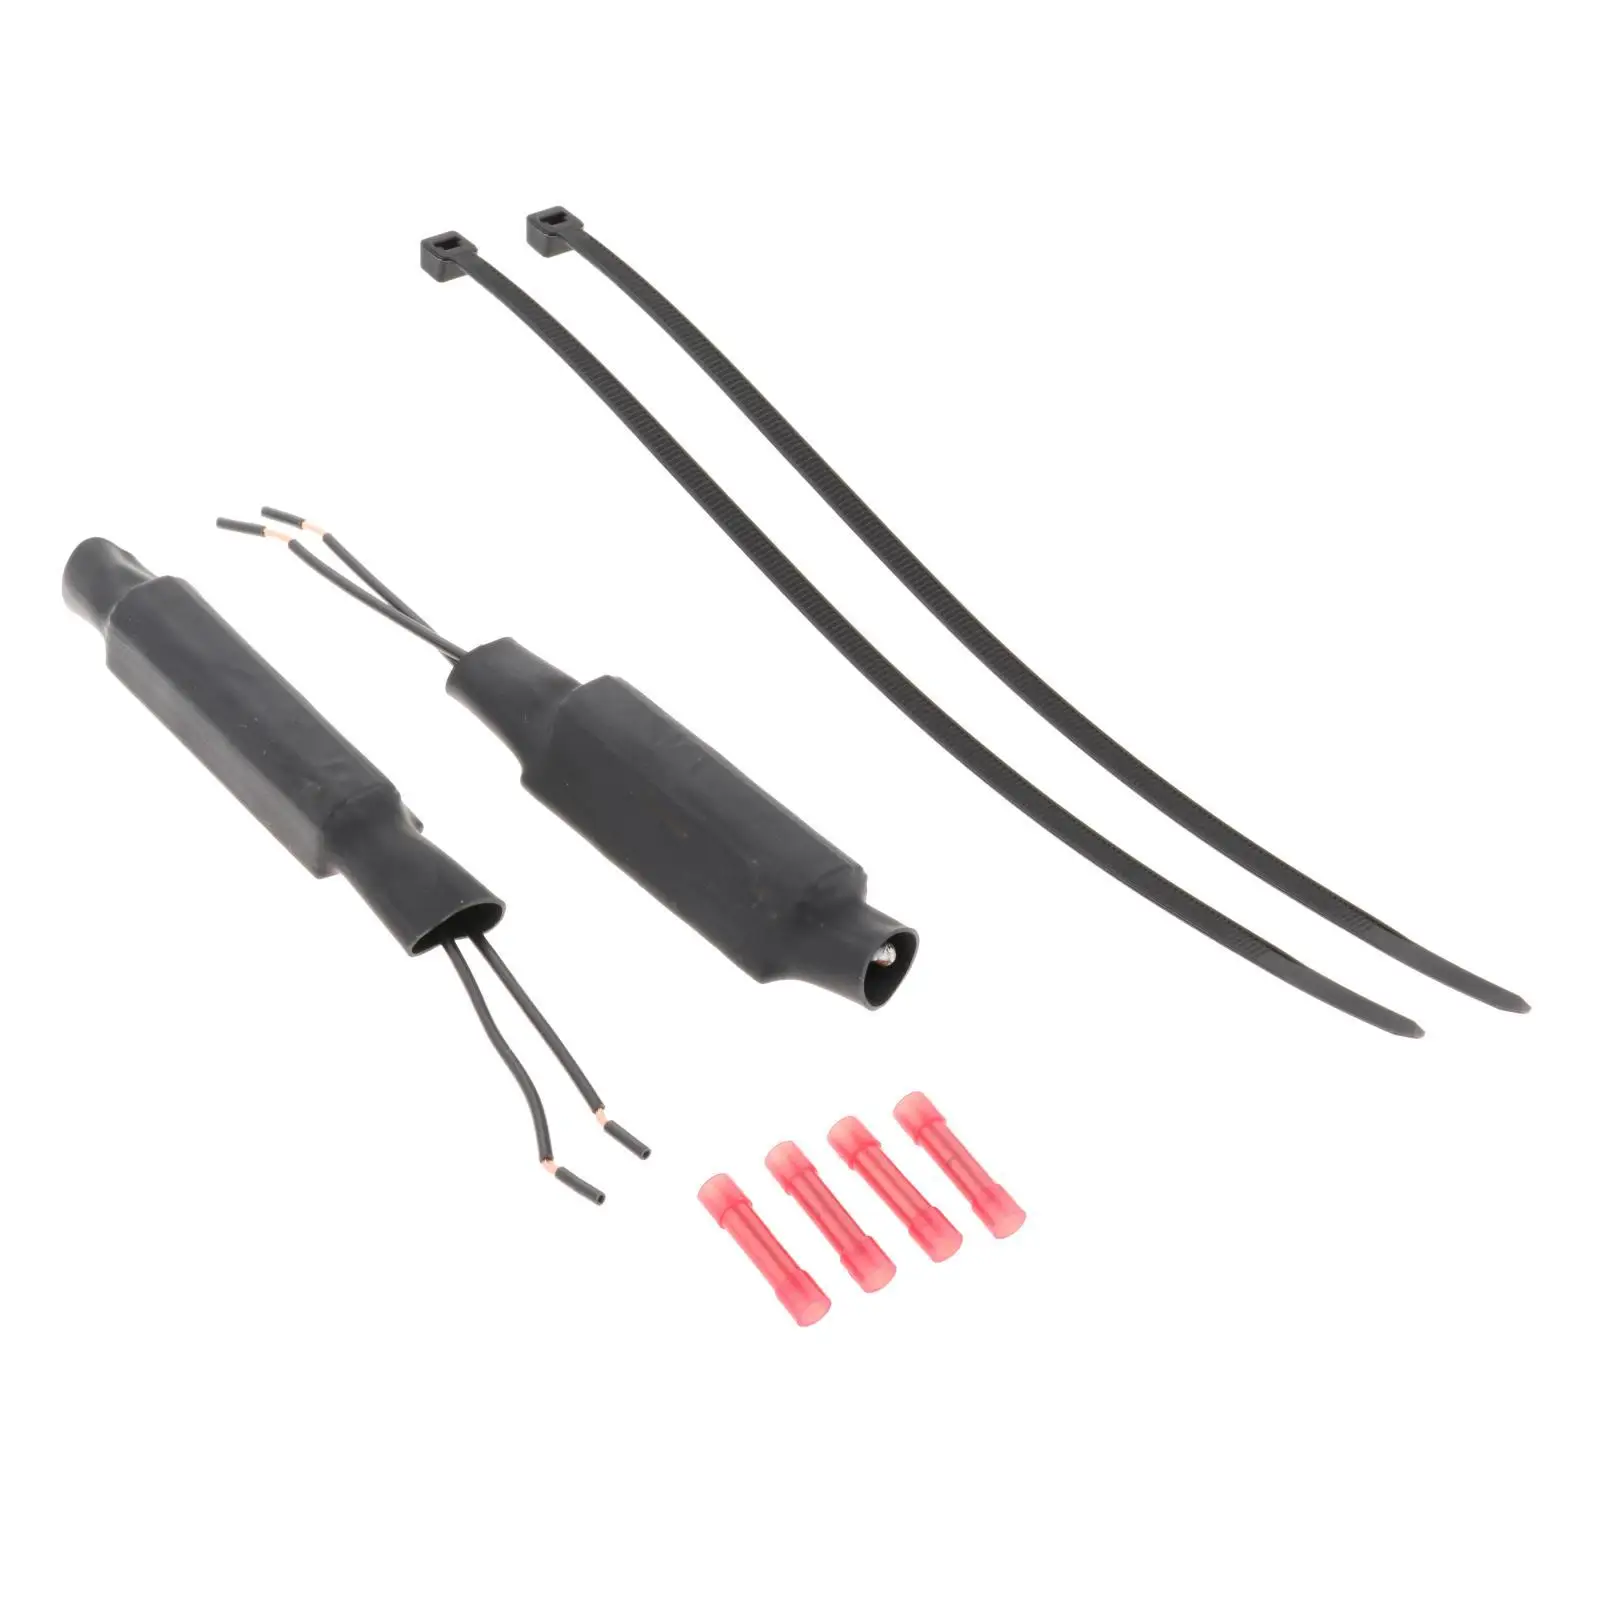 Car Strut Kit Supplies Fit for   13-2019 Accessories